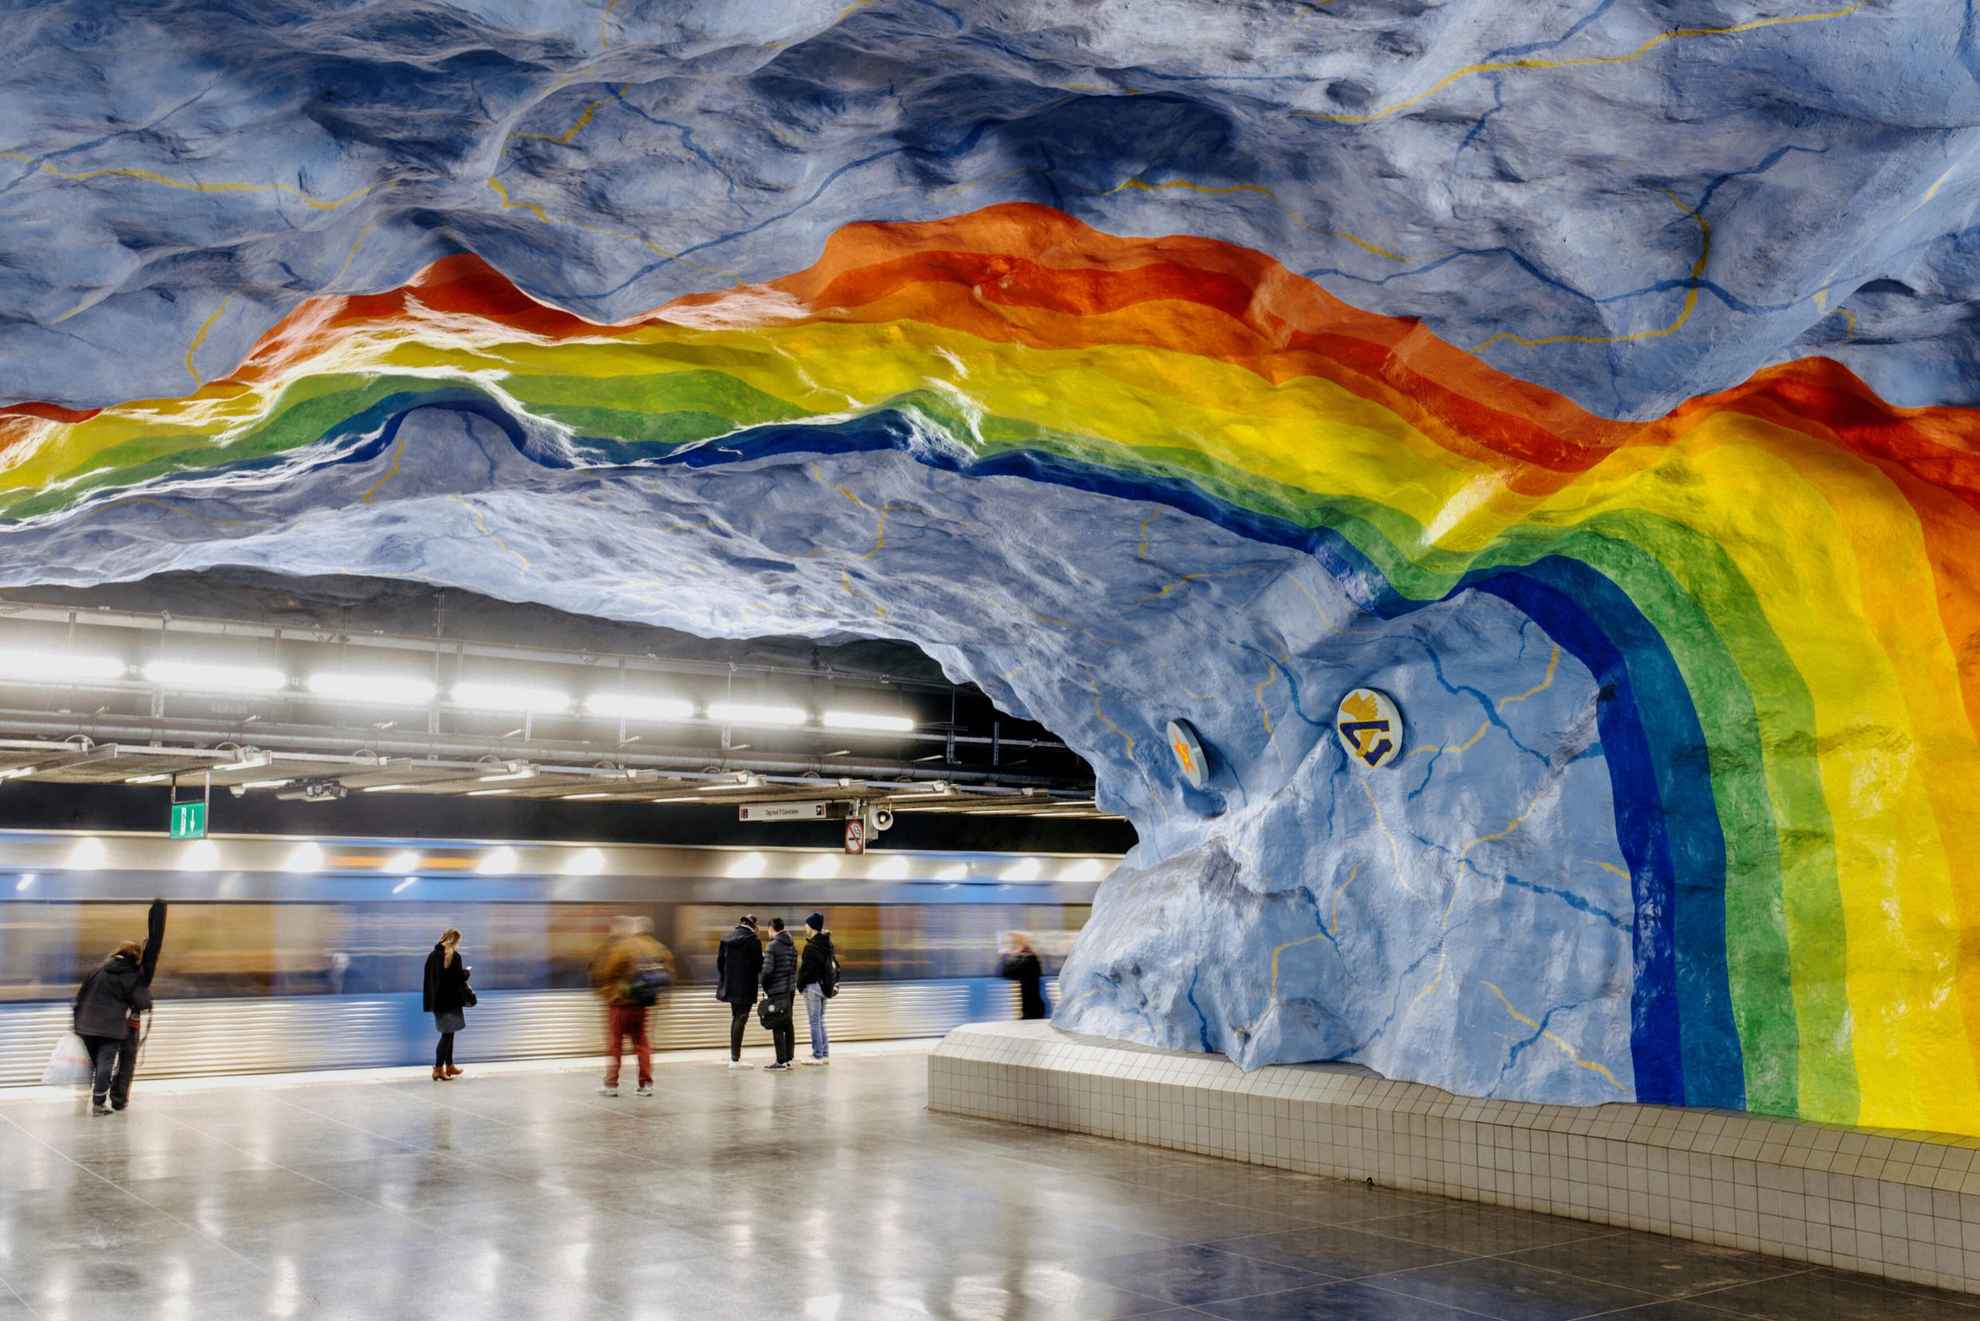 A rainbow in vivid colors painted in the ceiling in a subway station.